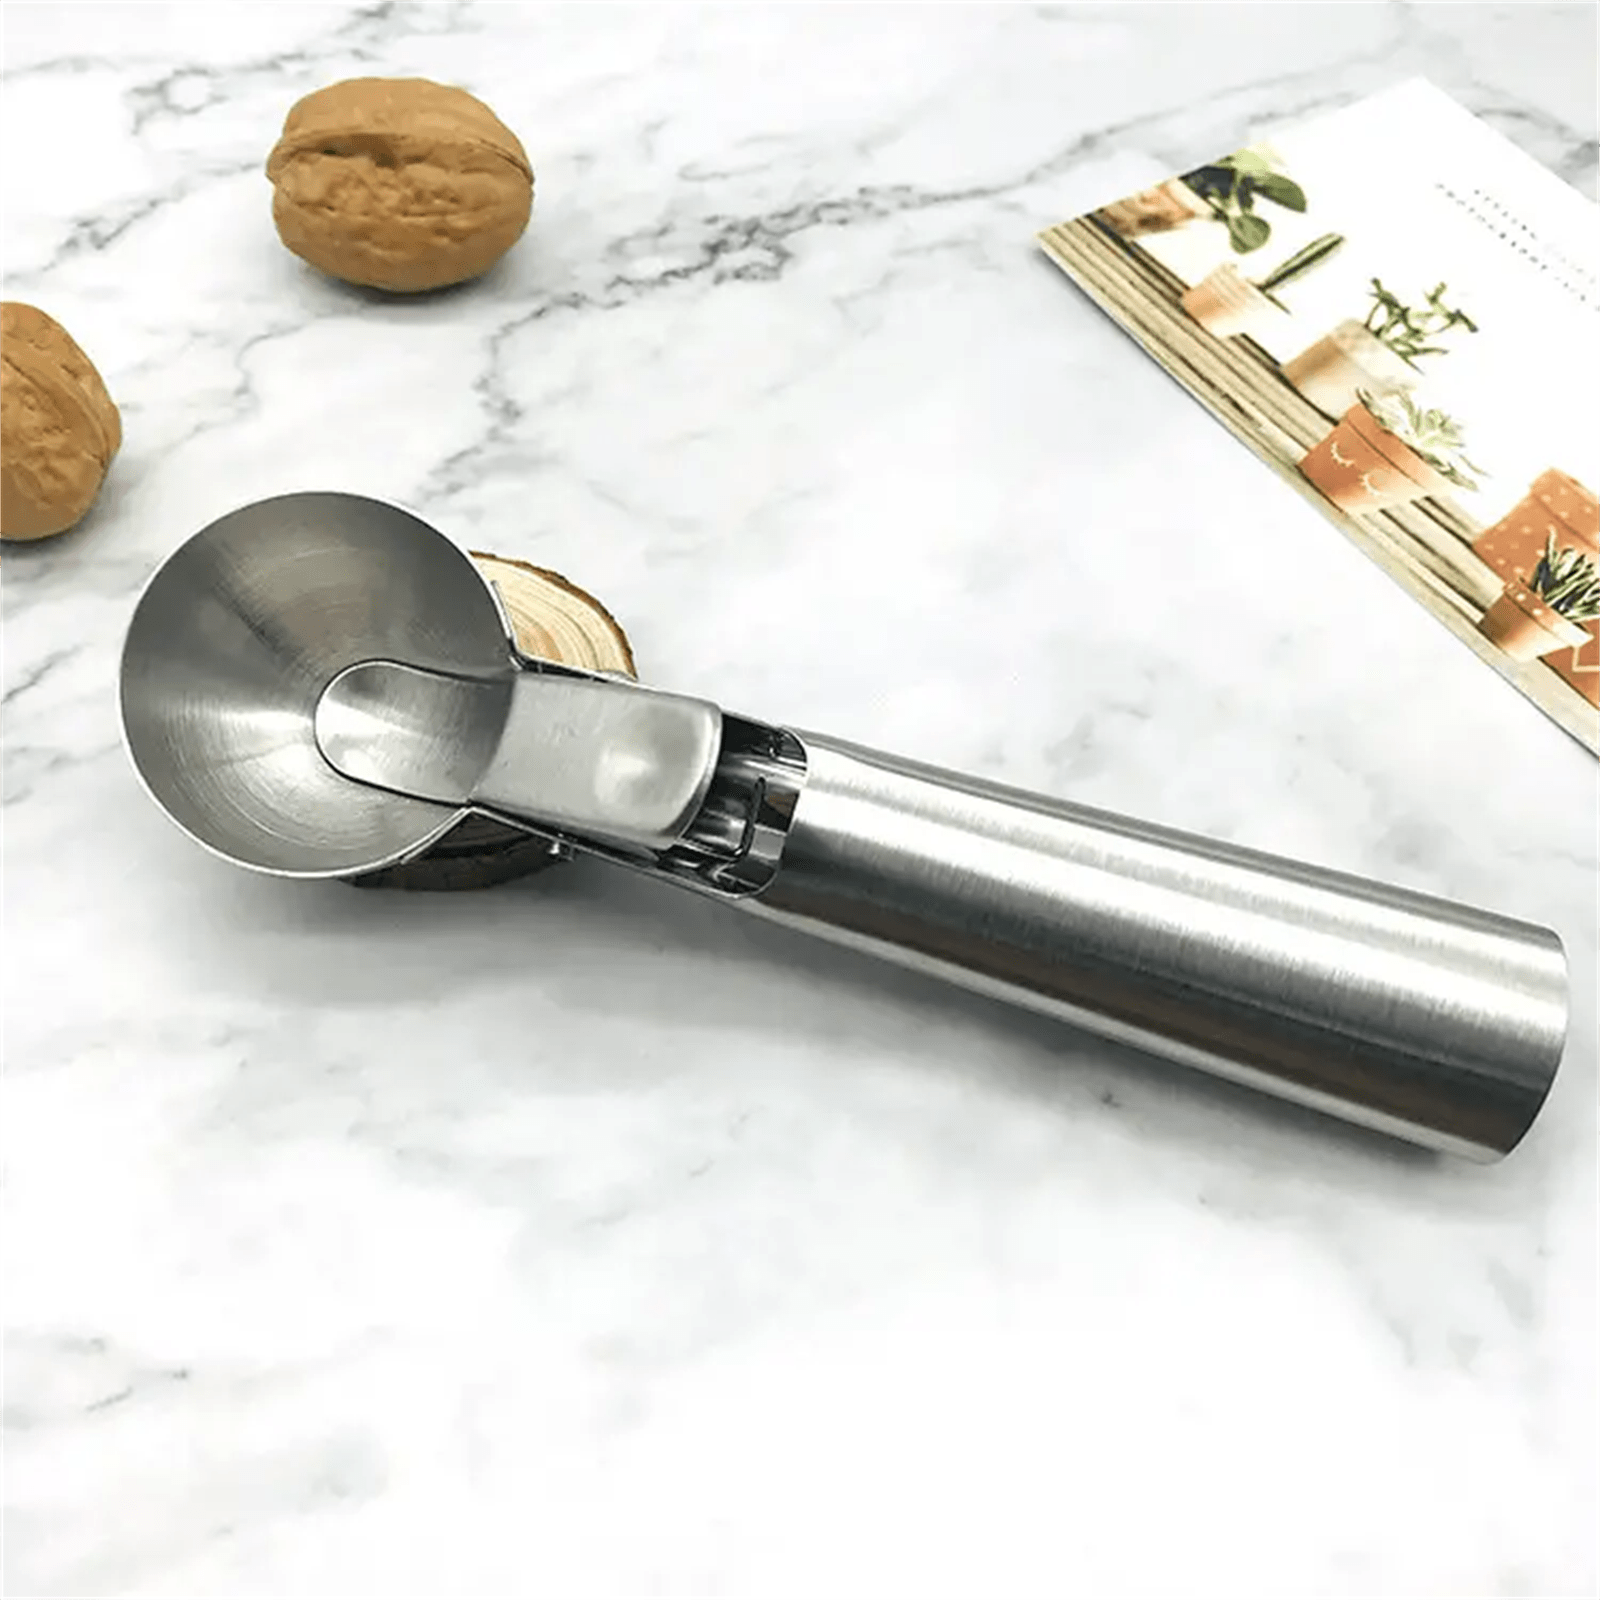 Heavy Duty Stainless Steel Ice Cream Scoop With Trigger - Perfect For Easy  Scooping And Serving - Temu